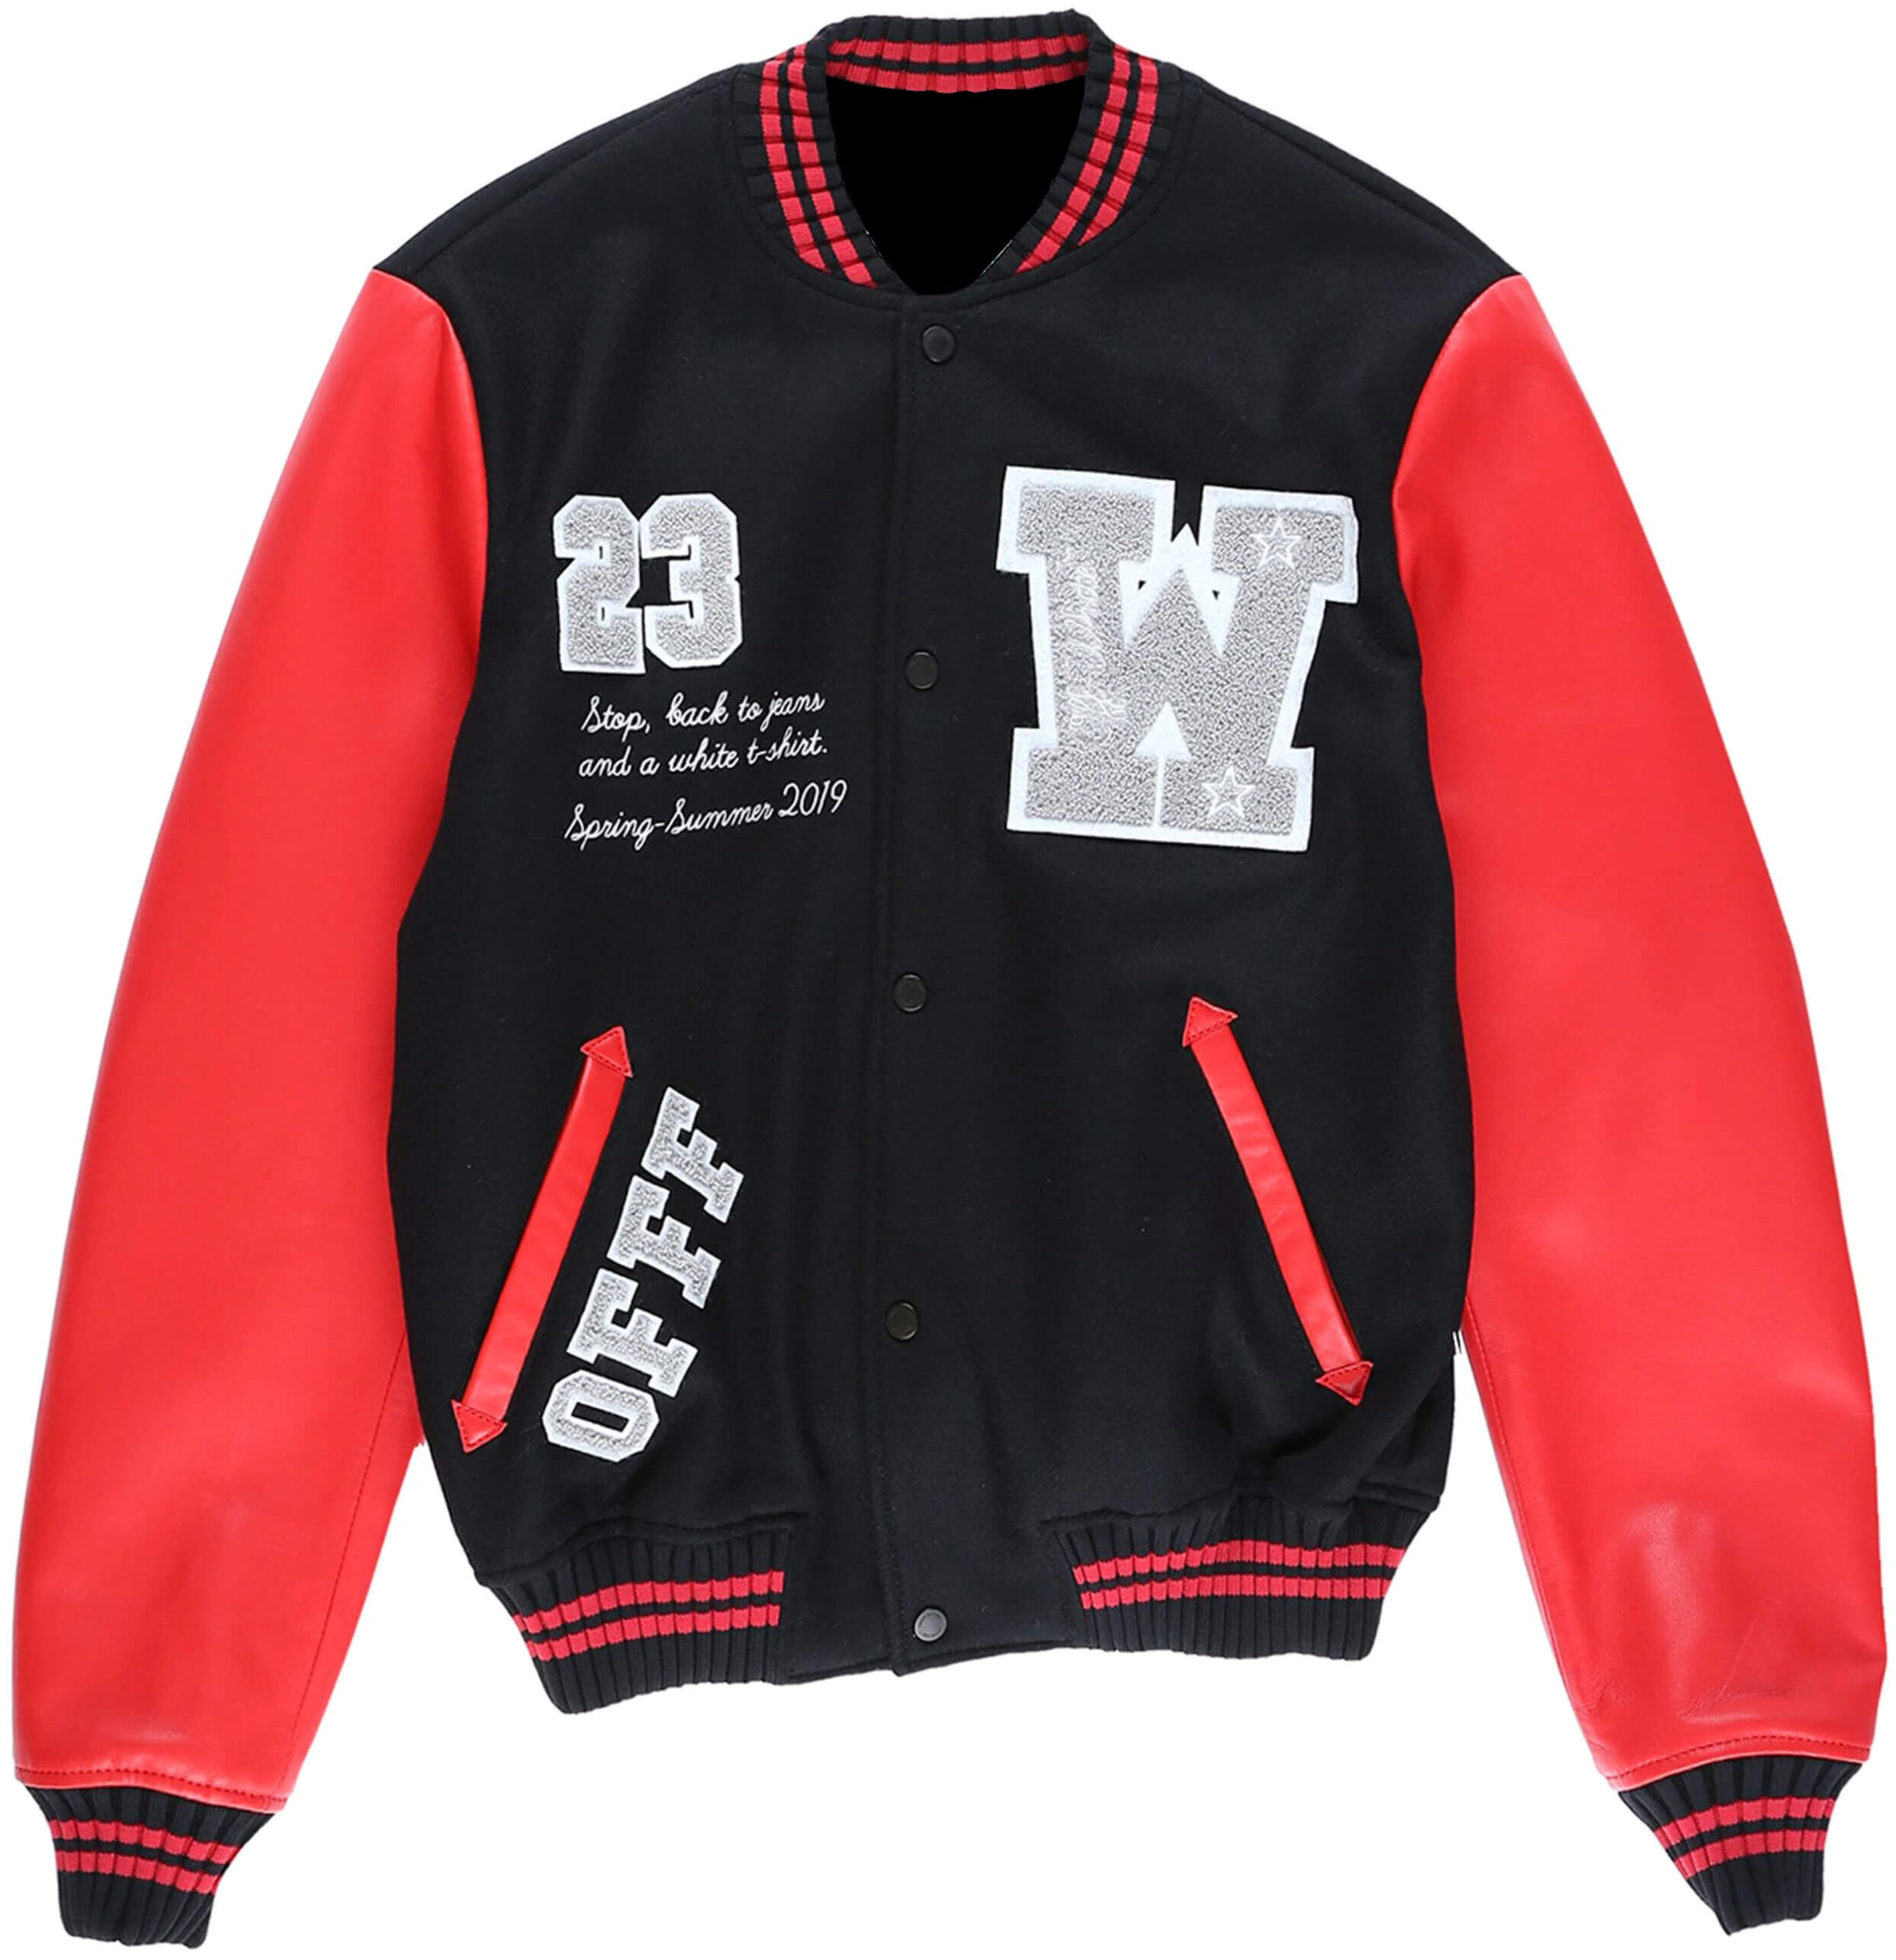 Black And Red Letterman Bomber Leather Jacket